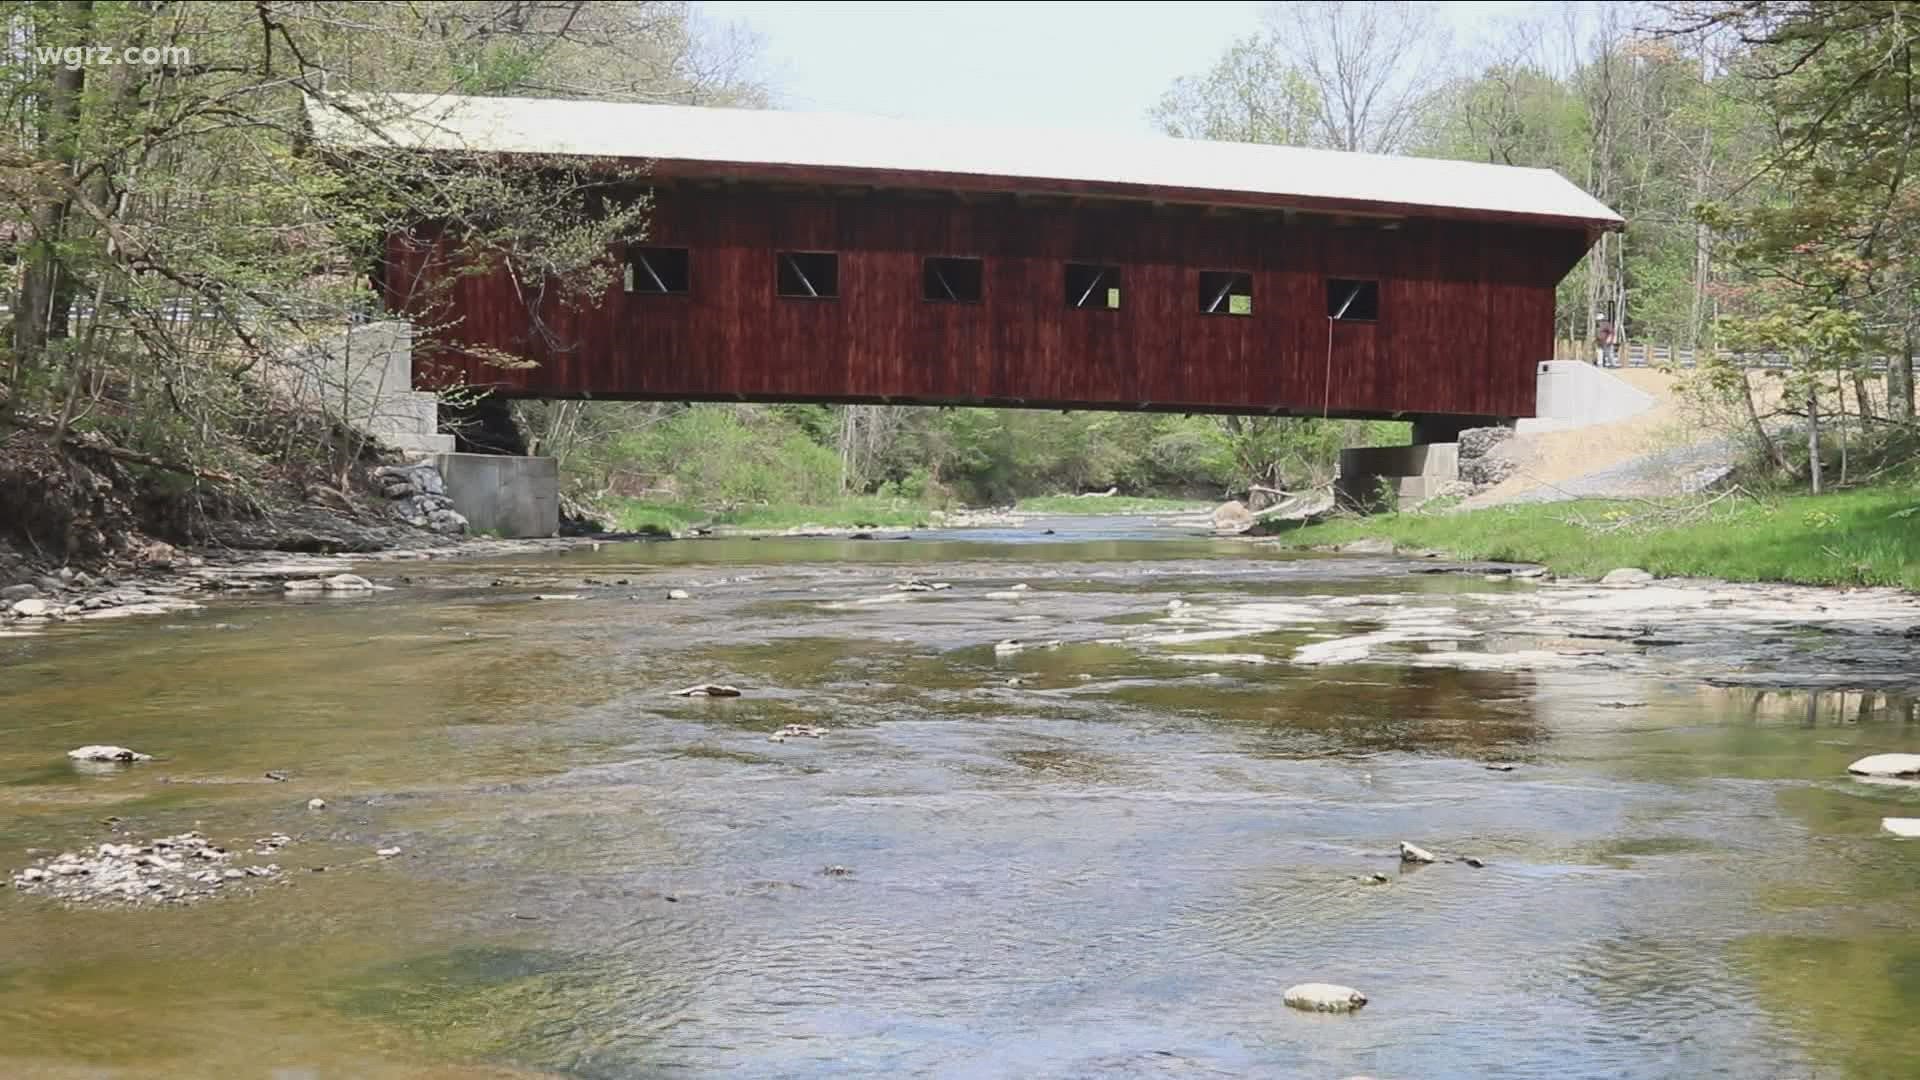 Construction is underway in Wyoming County on a new covered wooden bridge.